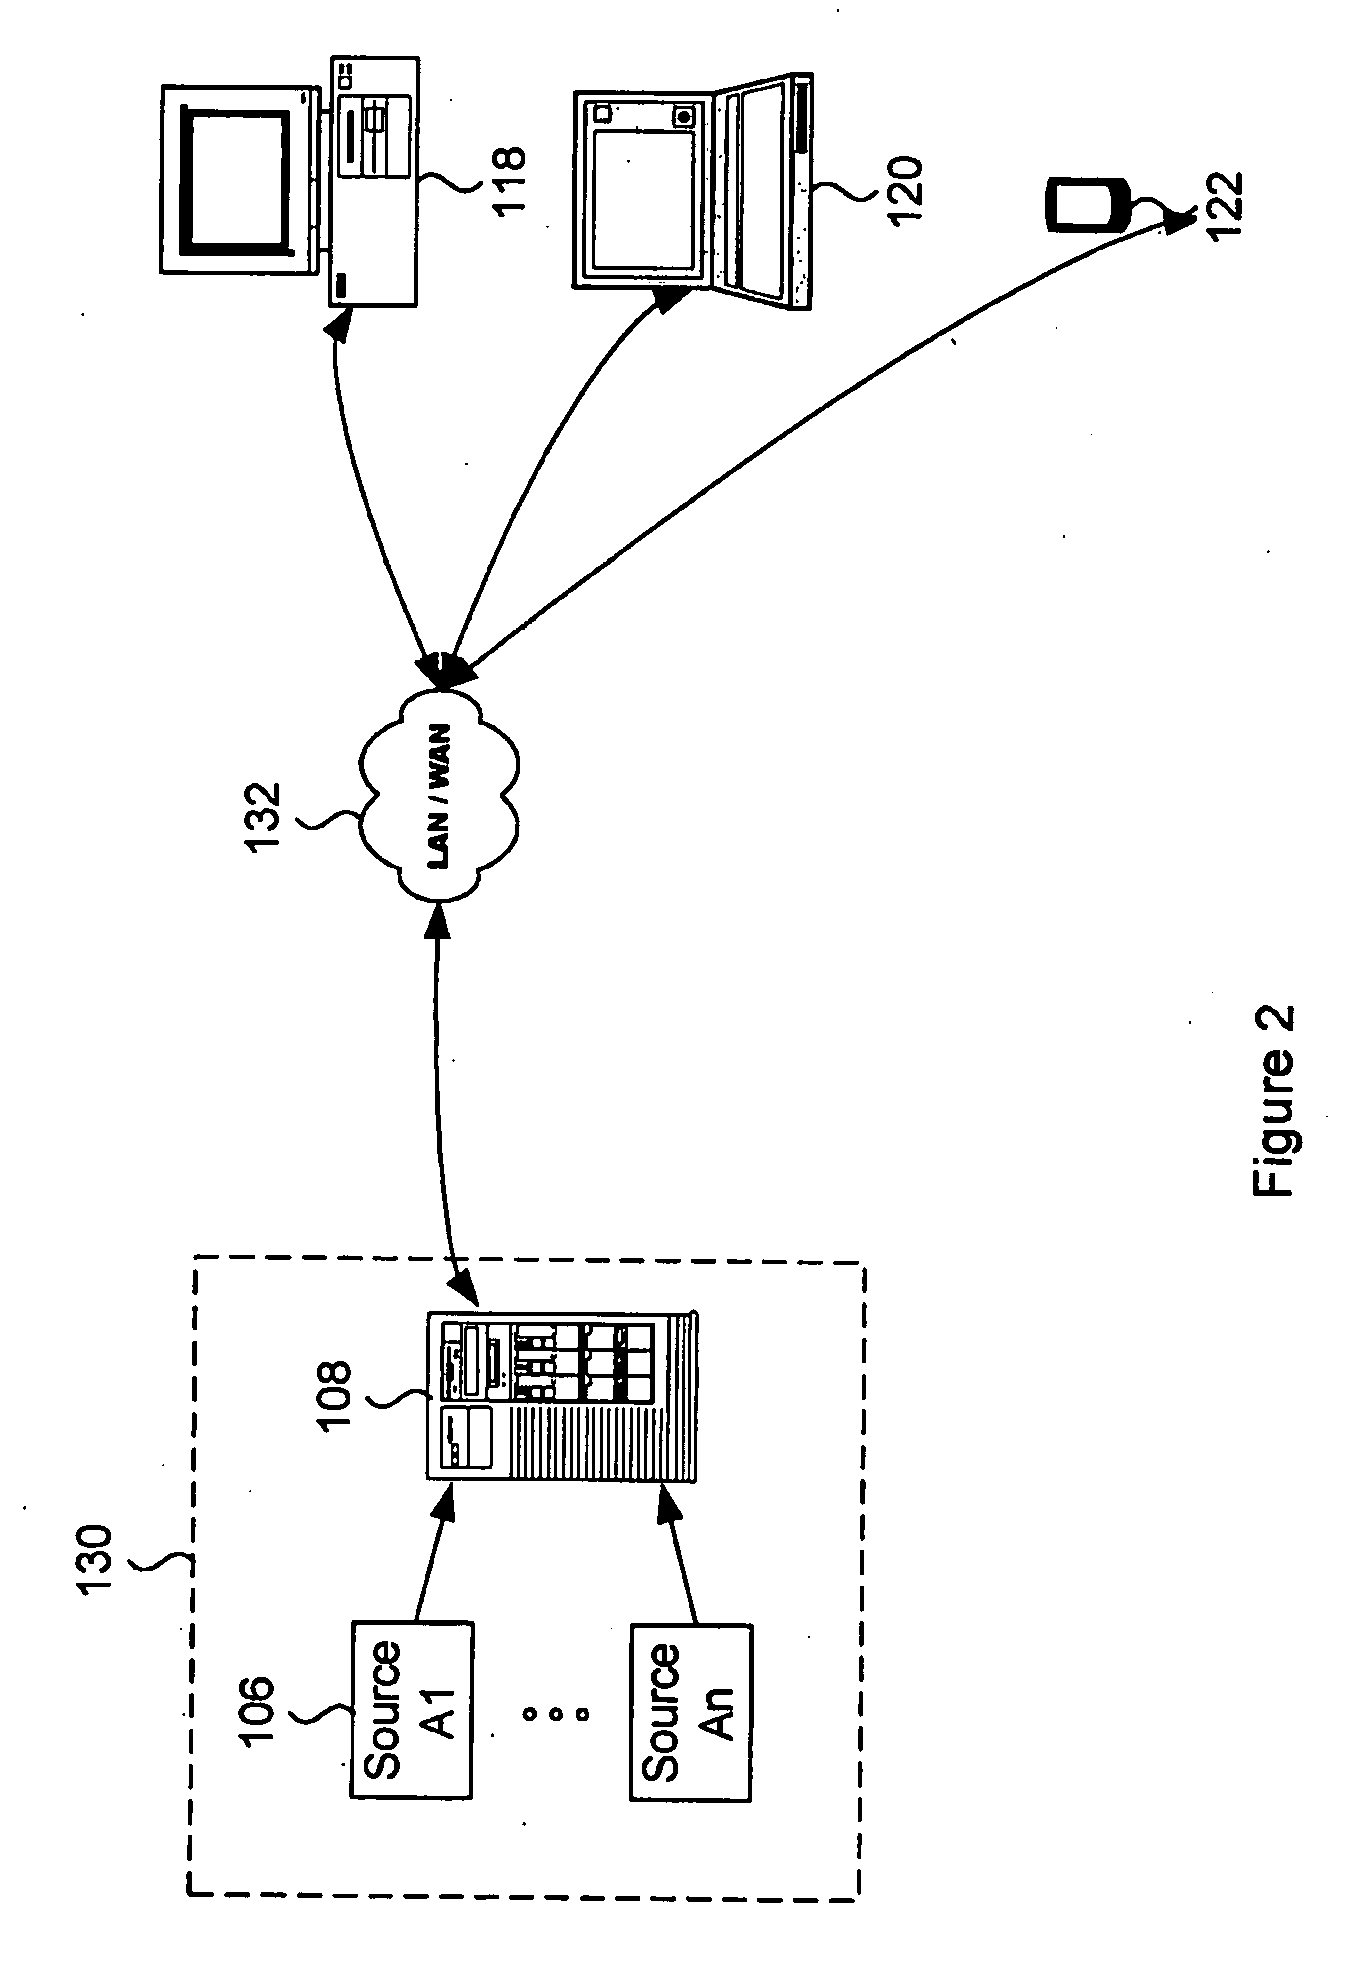 System and method for real-time media searching and alerting